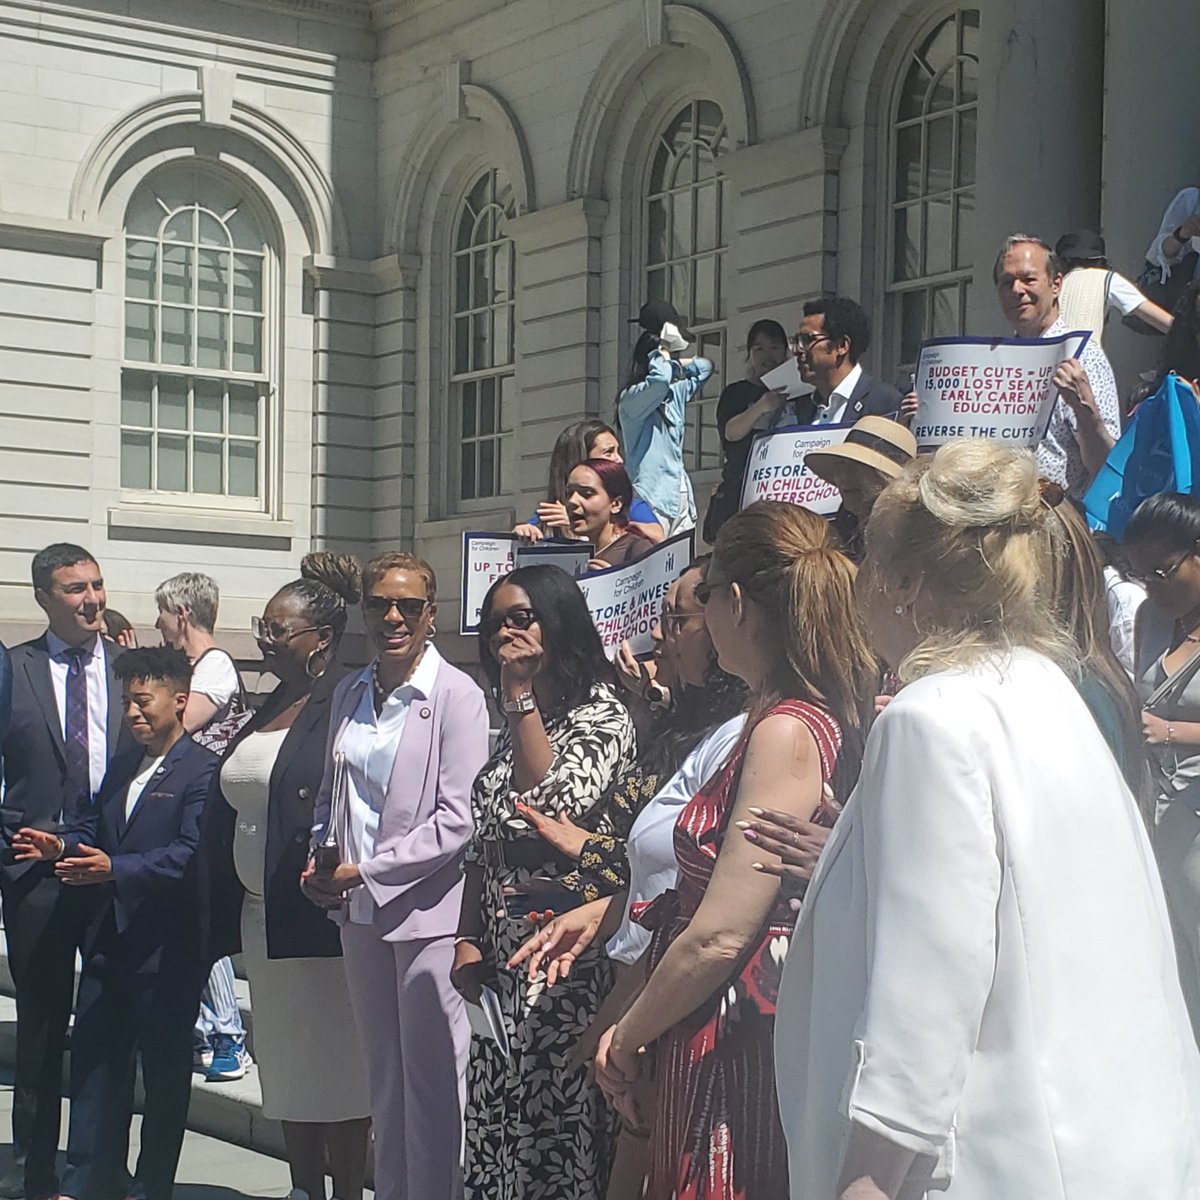 Thank you @NYCSpeakerAdams & @CMRitaJoseph for speaking today about the more than 700 hundred young children with autism & other intensive disabilities waiting for preschool special education classes. Thank you for keeping them front and center when they are so often overlooked.